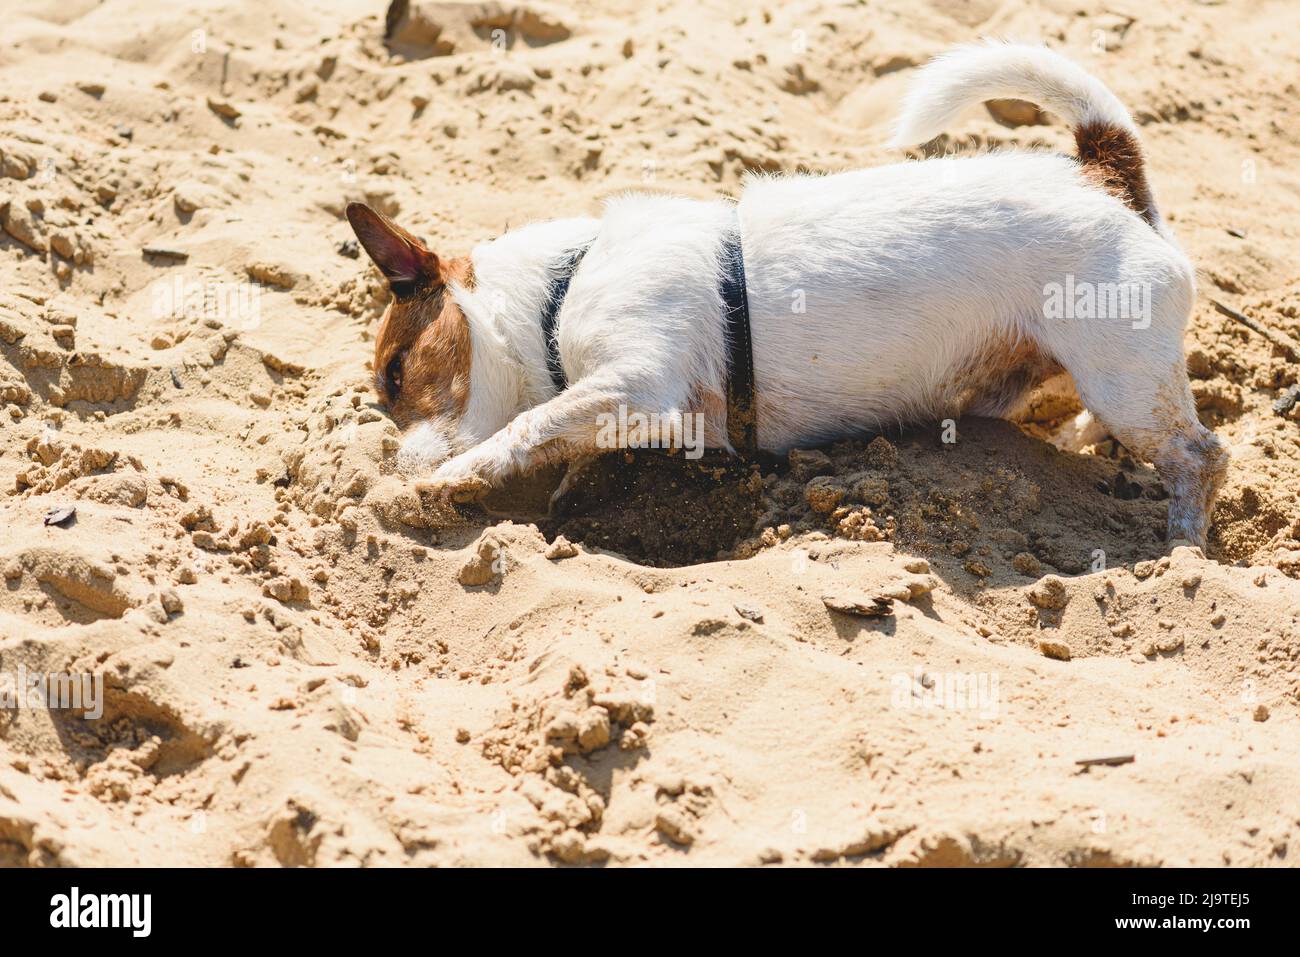 Dog walking at sand beach digging hole to cool down on hot sunny day Stock Photo